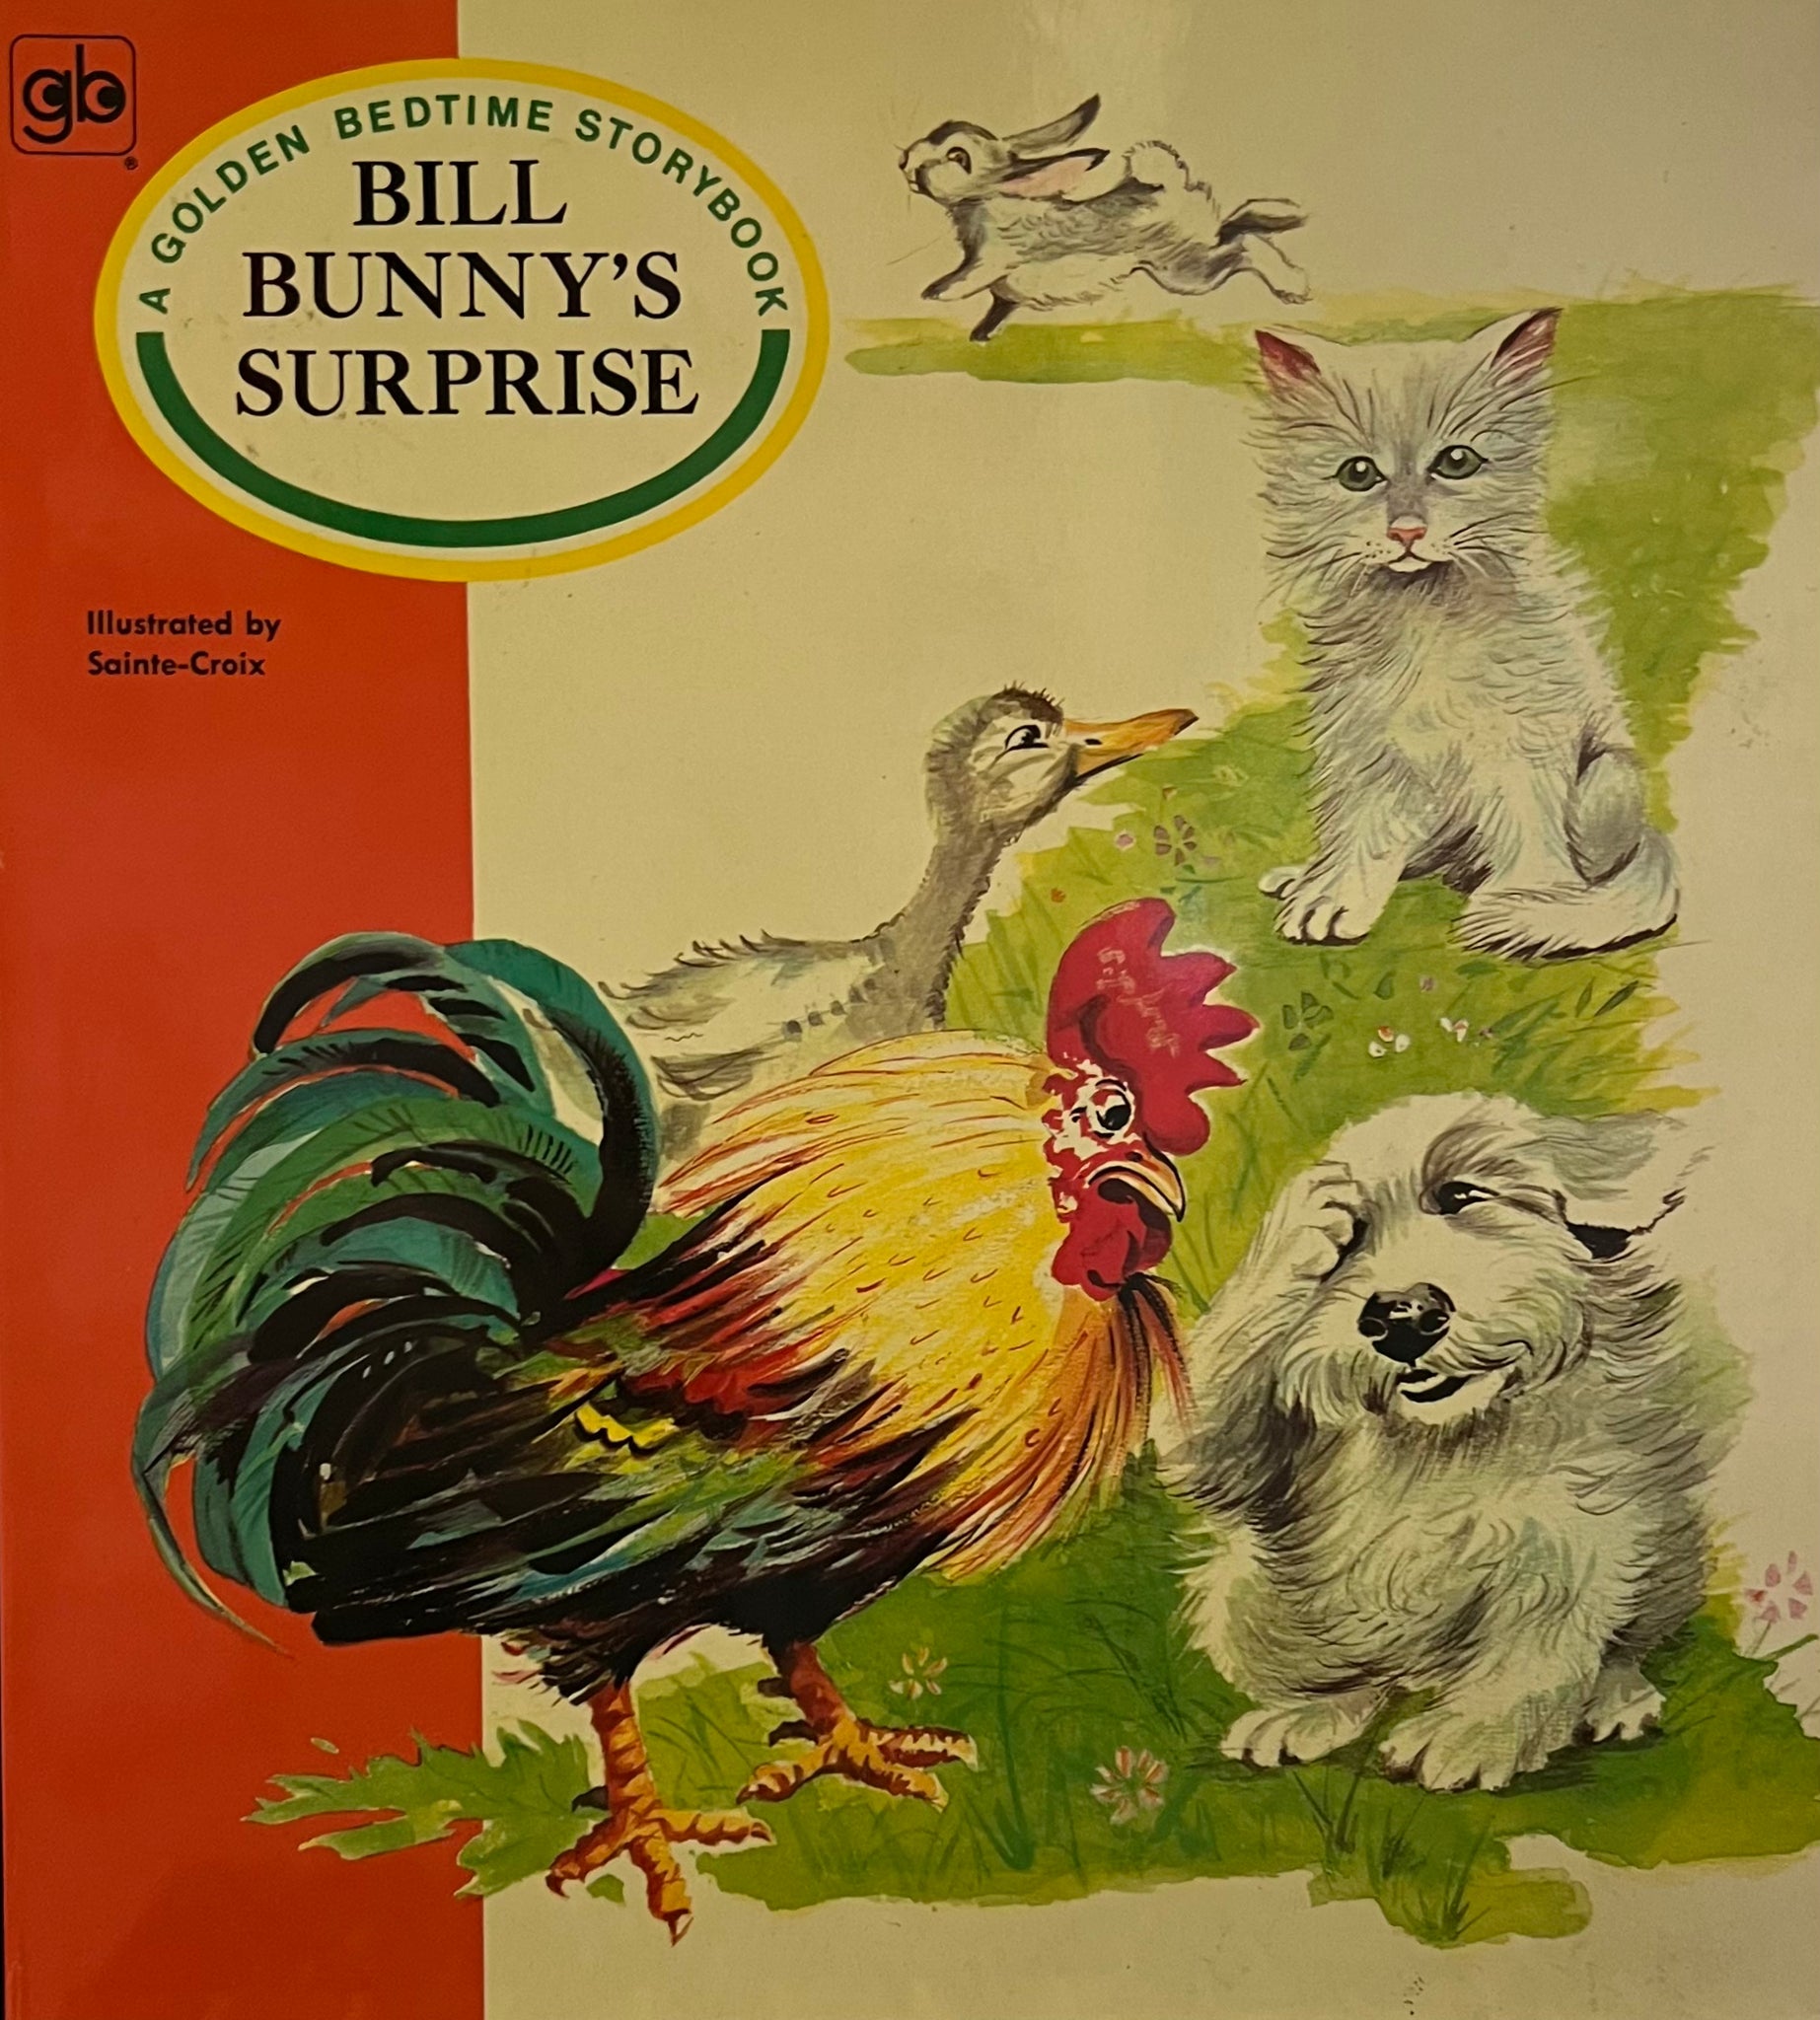 Bill Bunny’s Surprise (A Golden Bedtime Storybook), Illustrated by Sainte-Croix